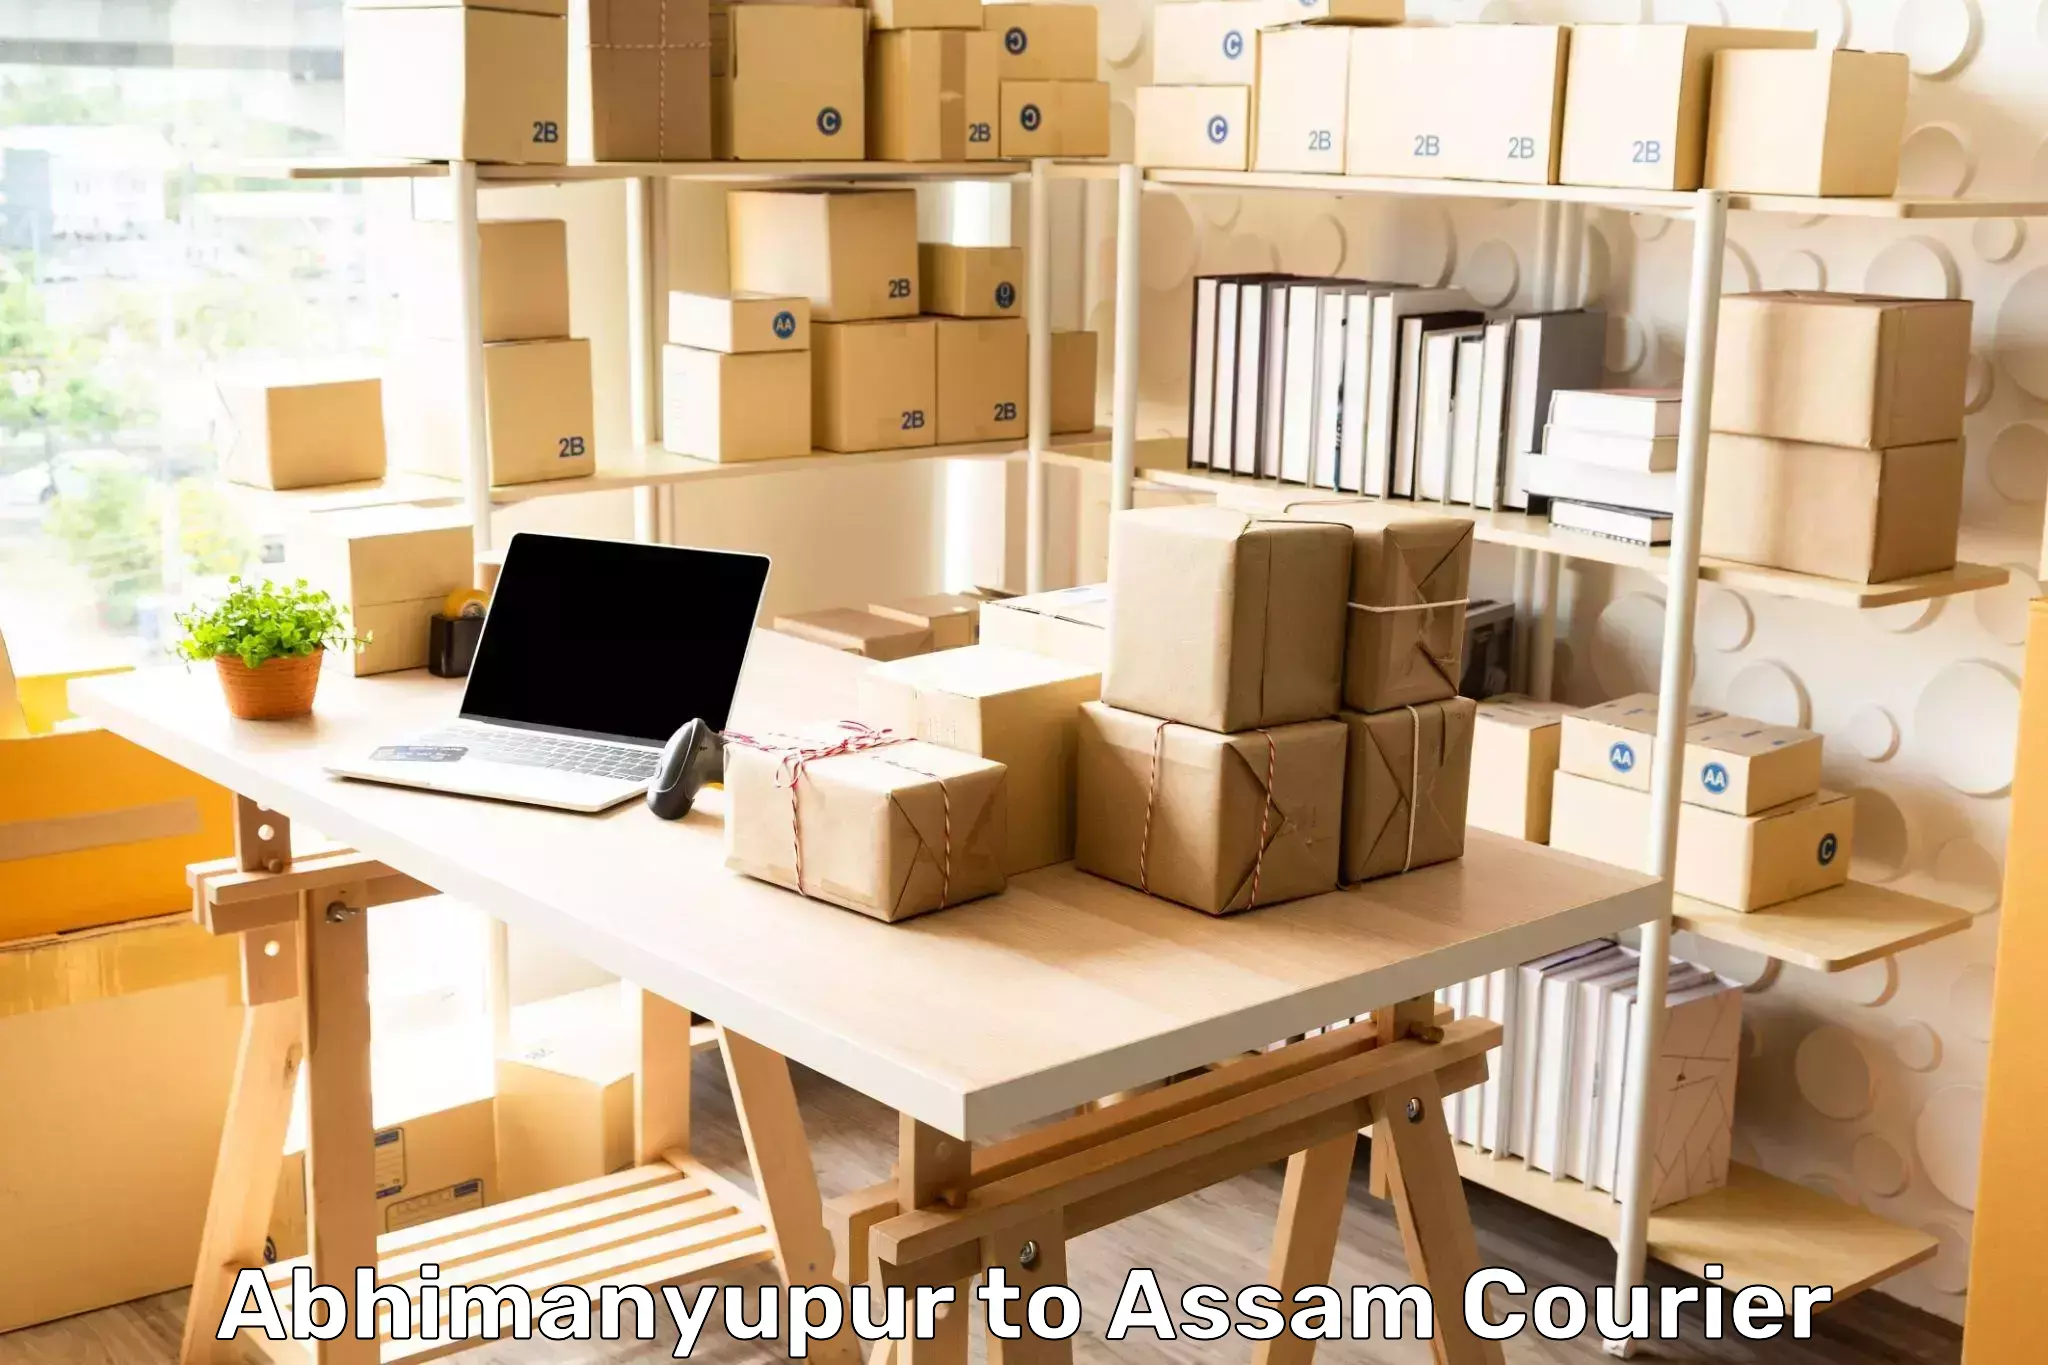 Courier rate comparison in Abhimanyupur to Hailakandi